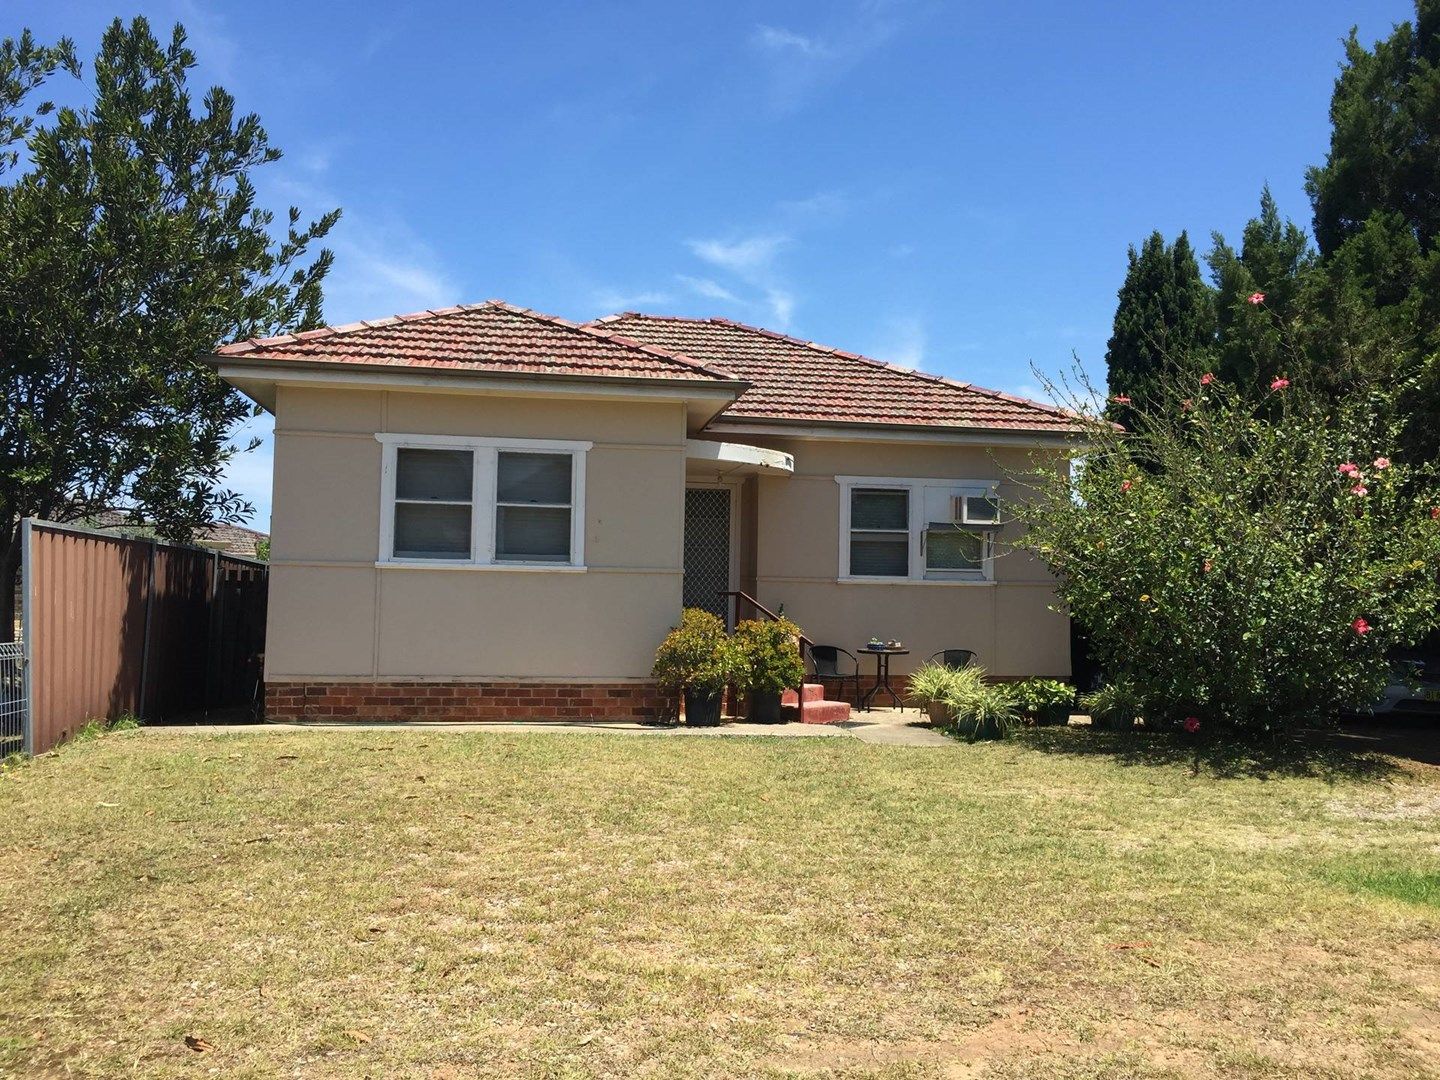 10-12 Restwell Road, Bossley Park NSW 2176, Image 0